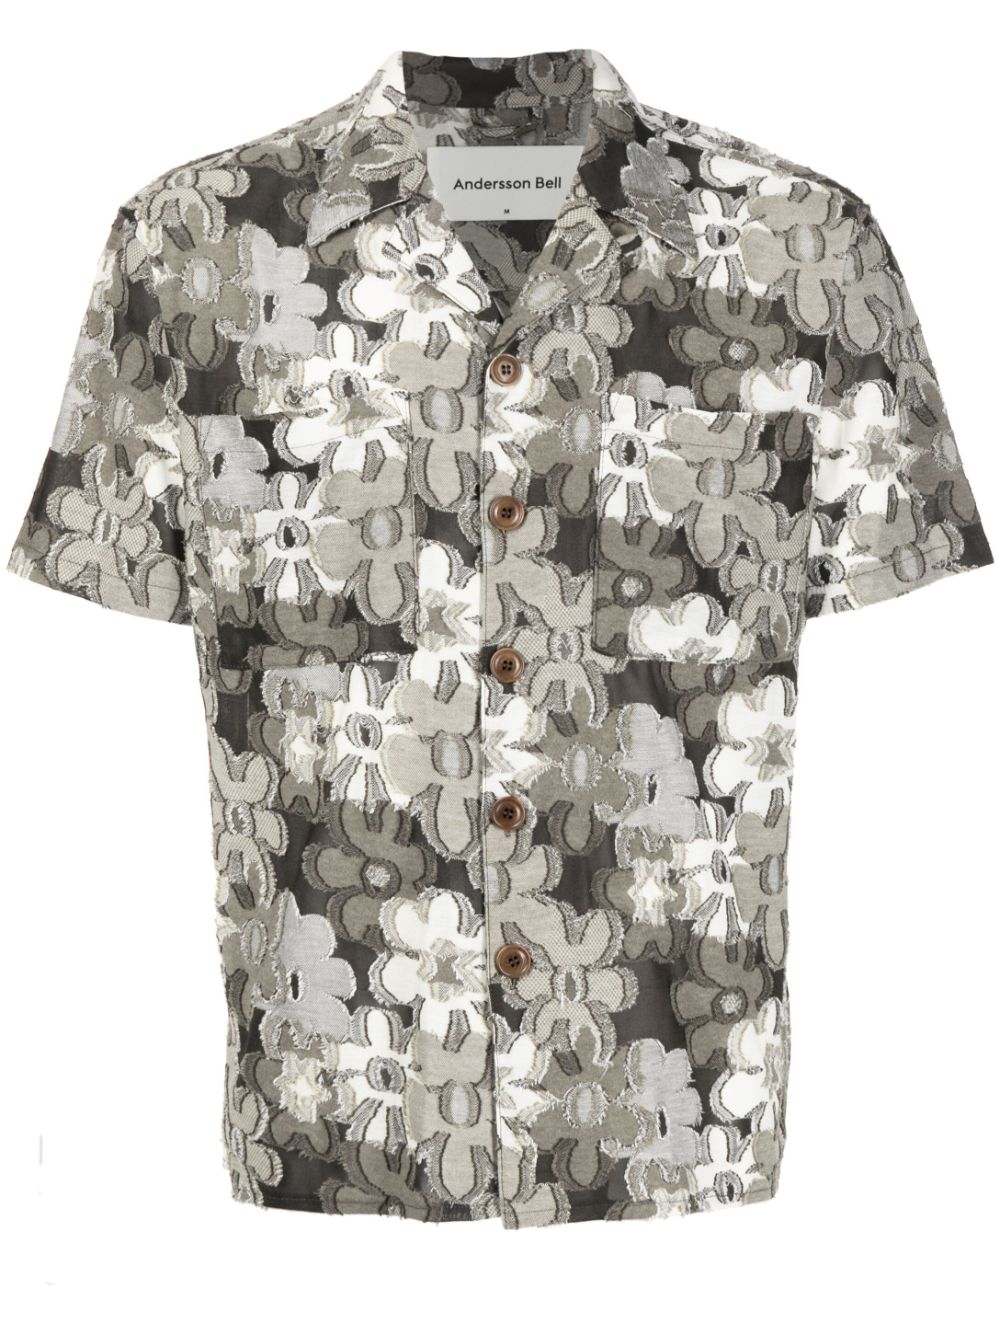 ANDERSSON BELL DISTRESSED-FINISH FLORAL SHIRT